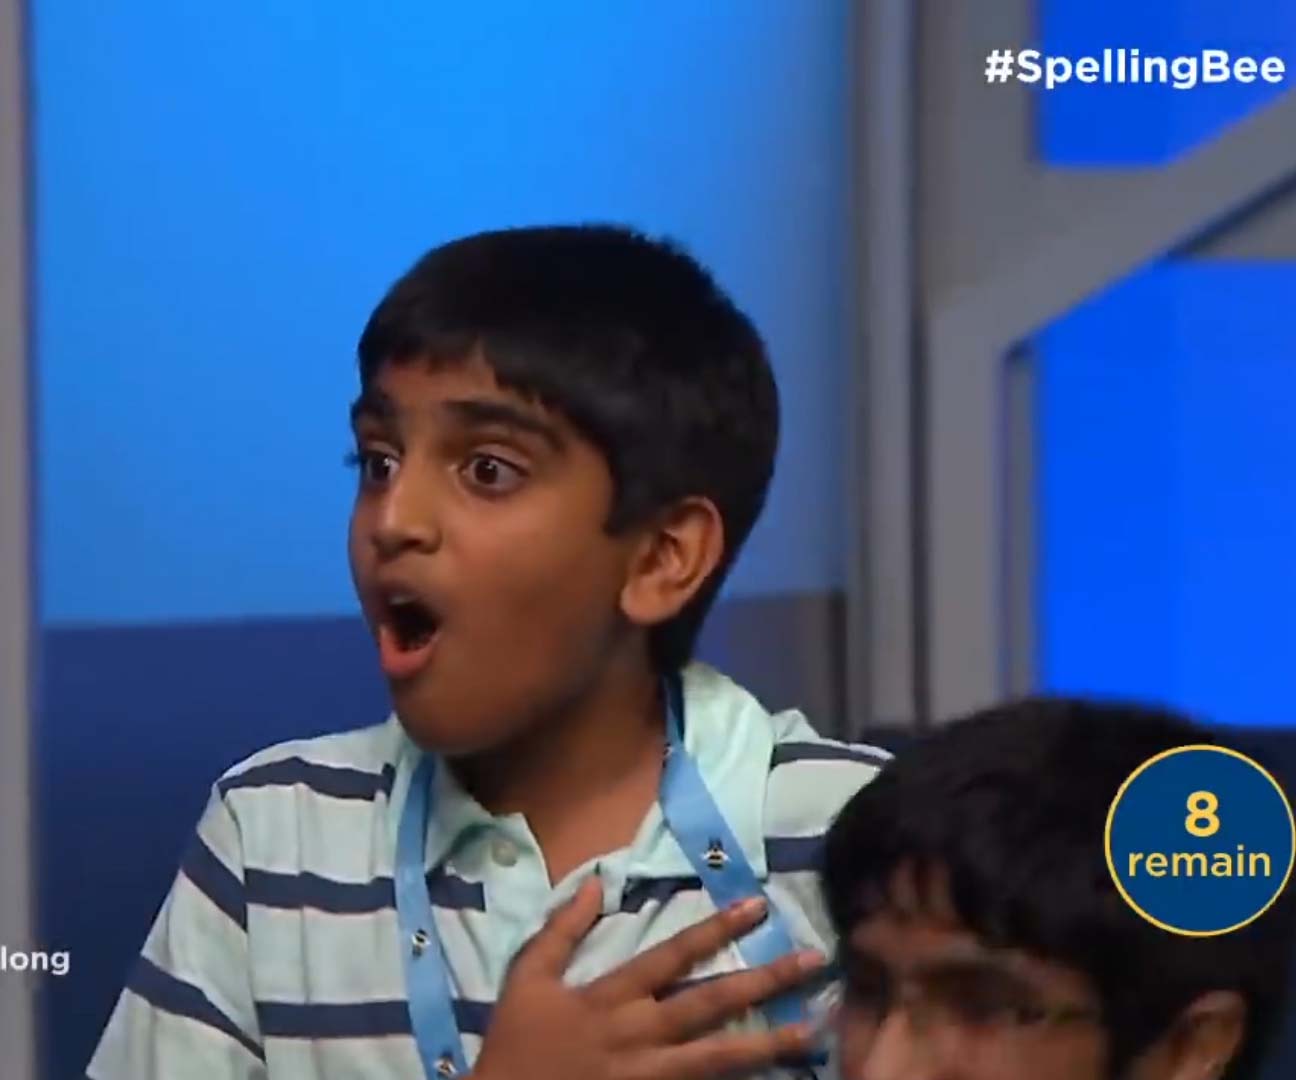 What happened at an American spelling bee that blew everyone’s minds